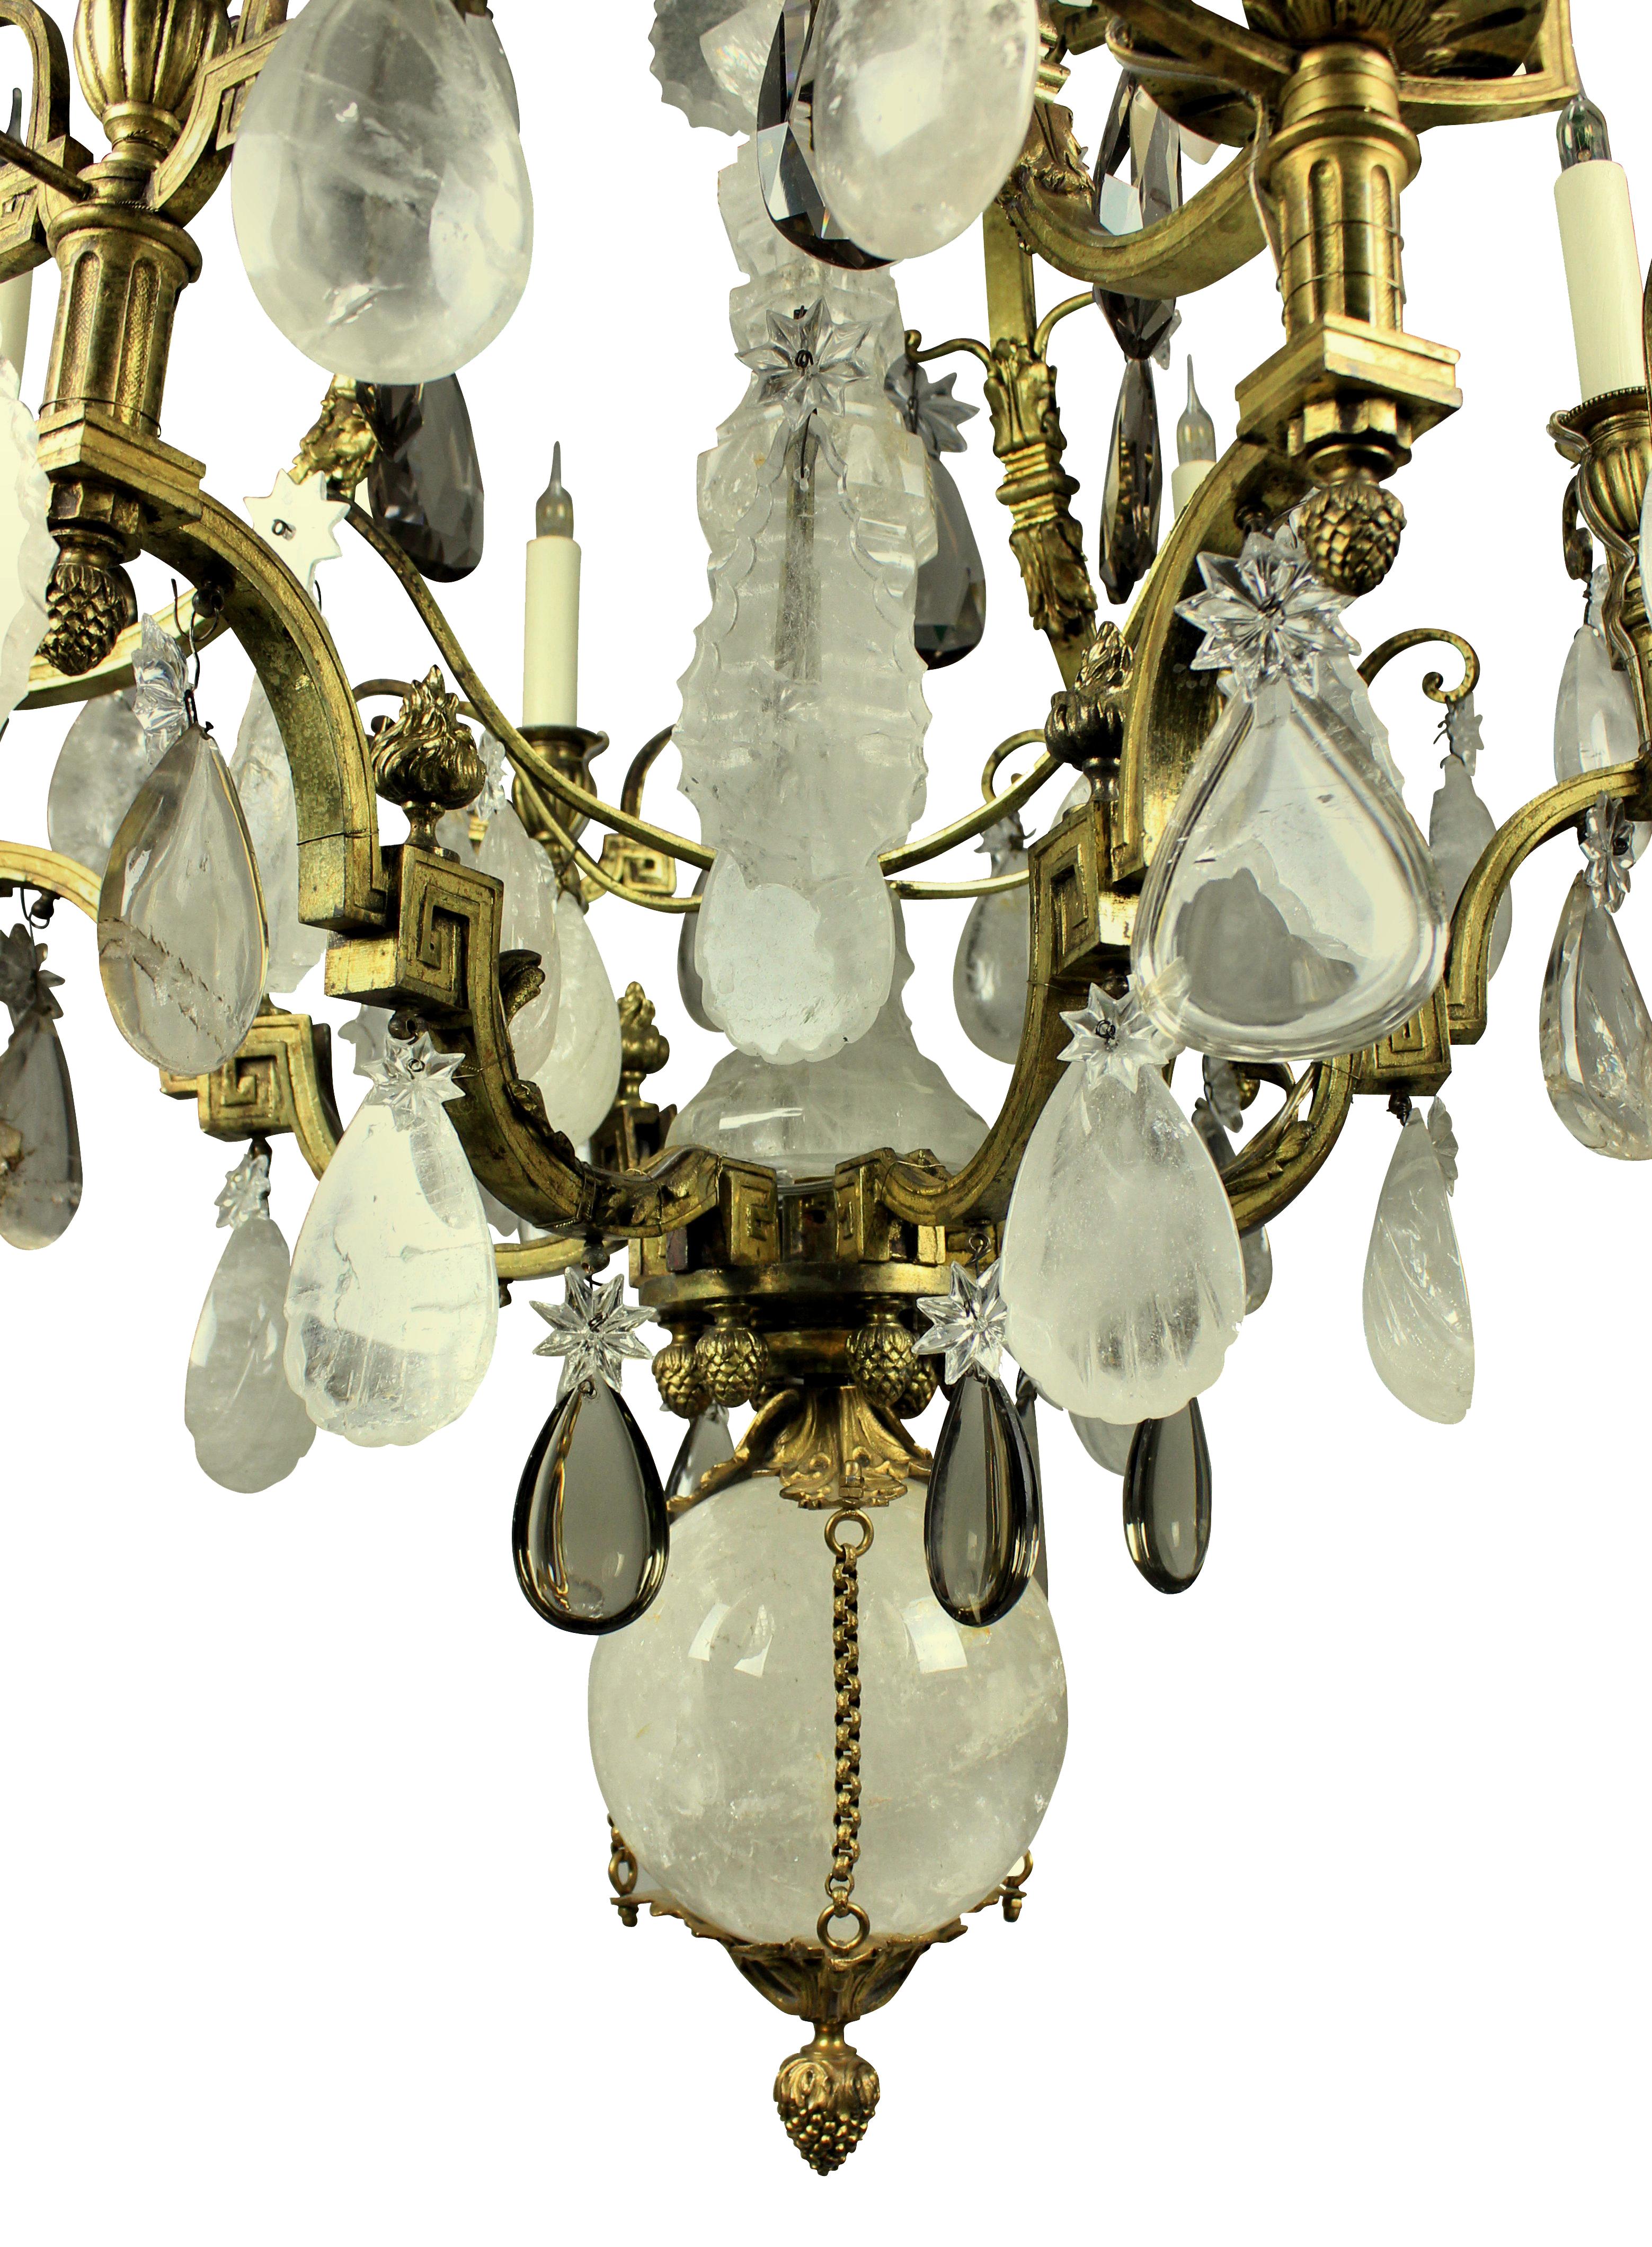 A fine Russian neoclassical gilt bronze and rock crystal chandelier with smoked quartz drops. Made in France for the Russian market.

The ball has a diameter of 18 cm and the largest plaque is 18 cm.